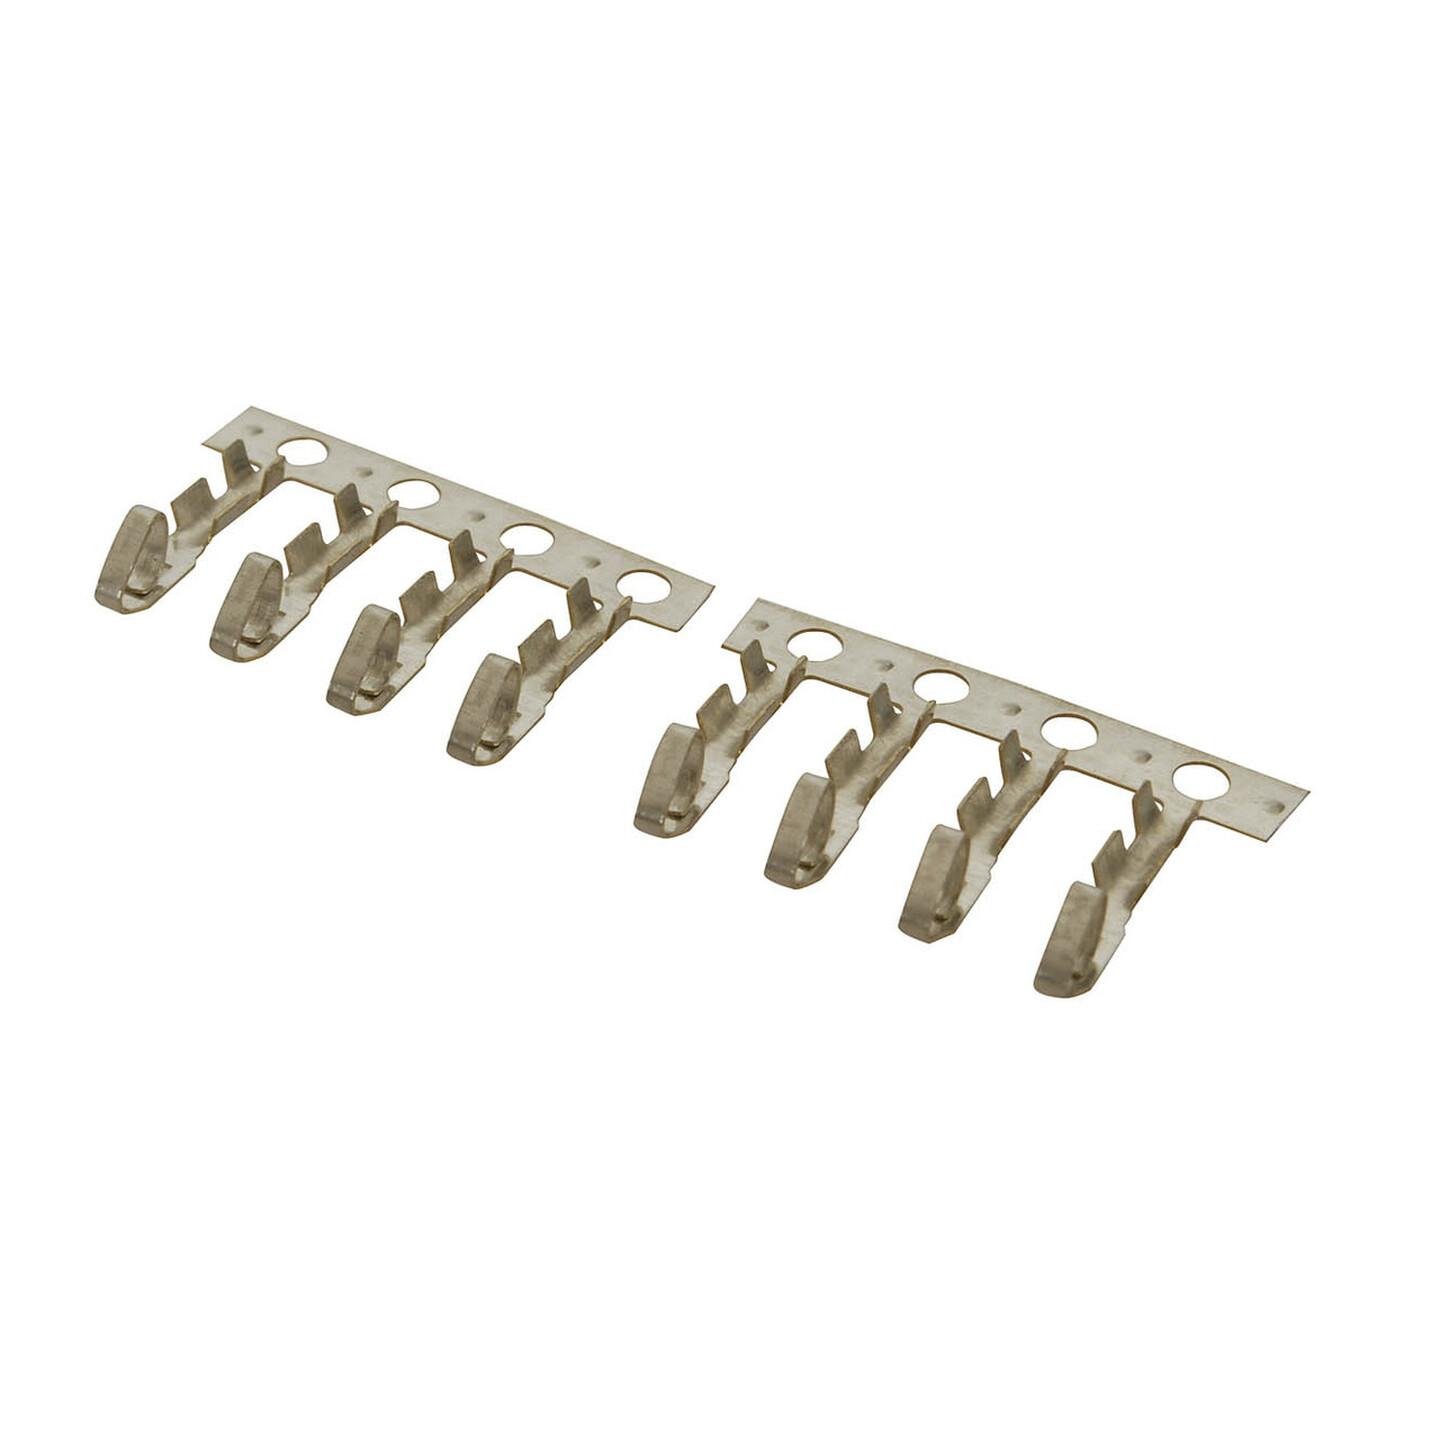 8 Pin 0.1in Header with Crimp Pins - 2.54mm Pitch